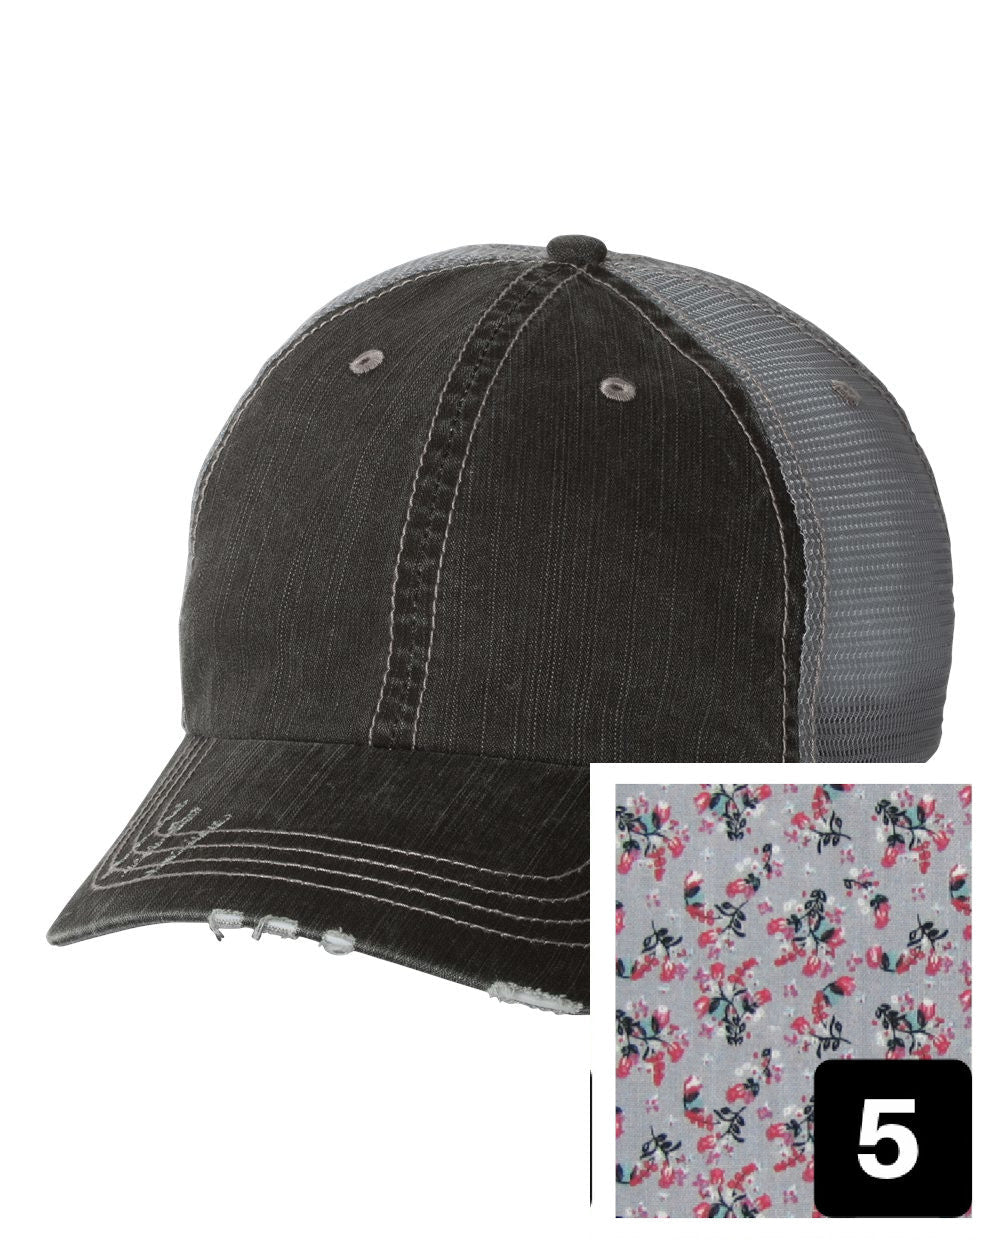 gray distressed trucker hat with purple and pink floral fabric state of Arkansas